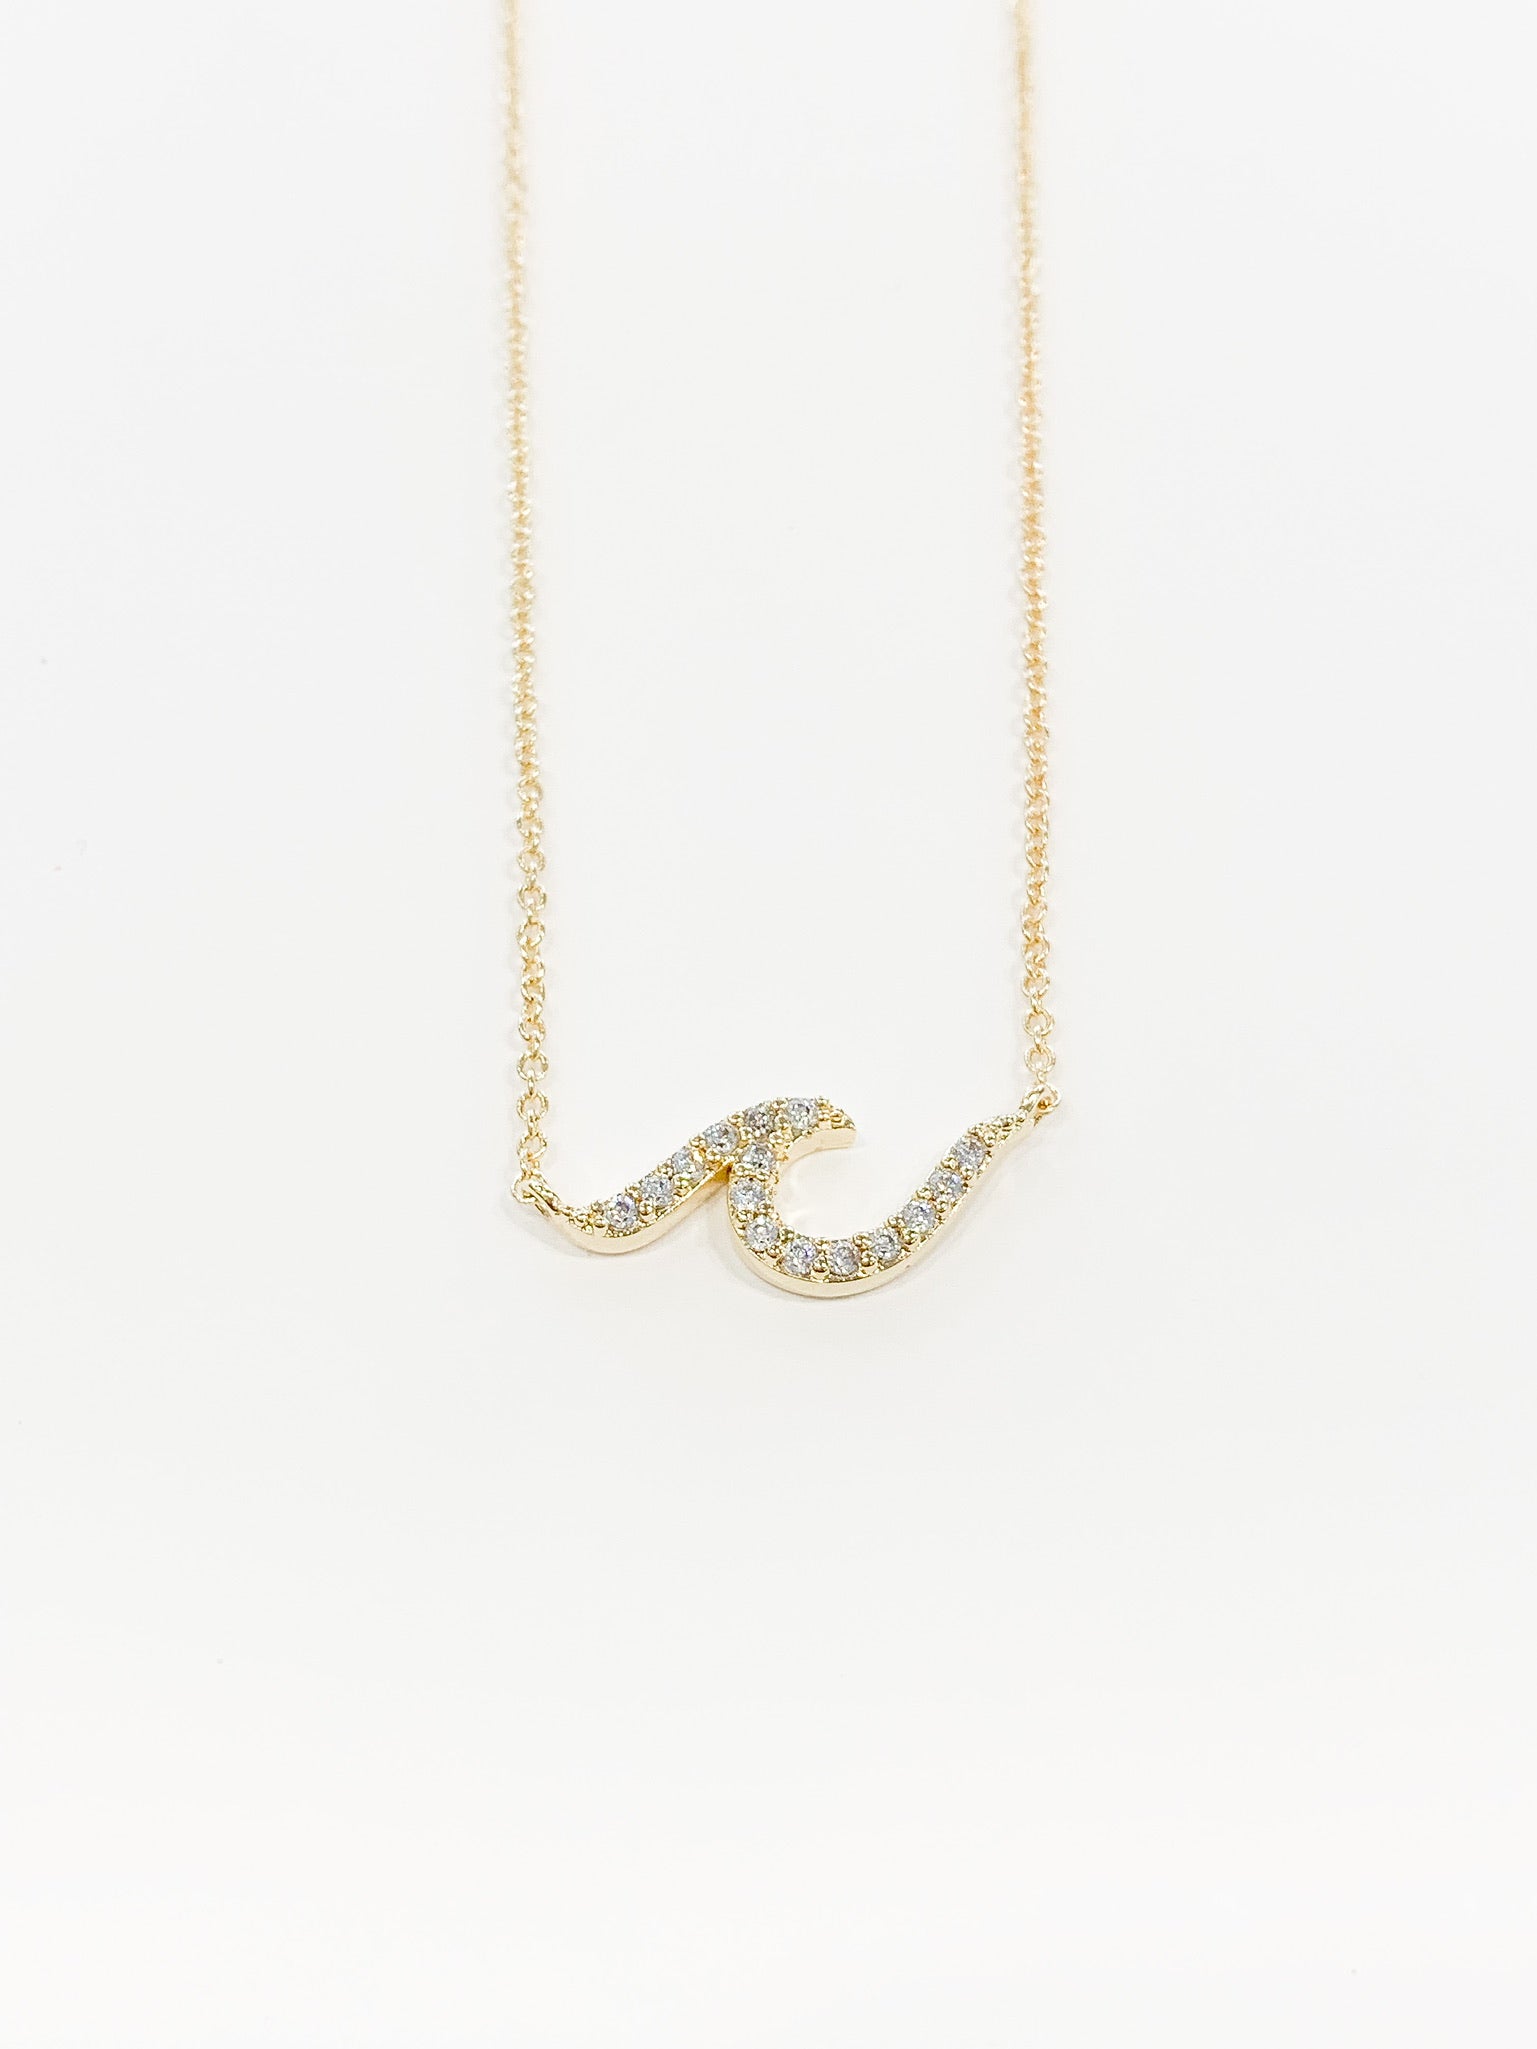 Avainna large wave necklace in gold. with crystals 